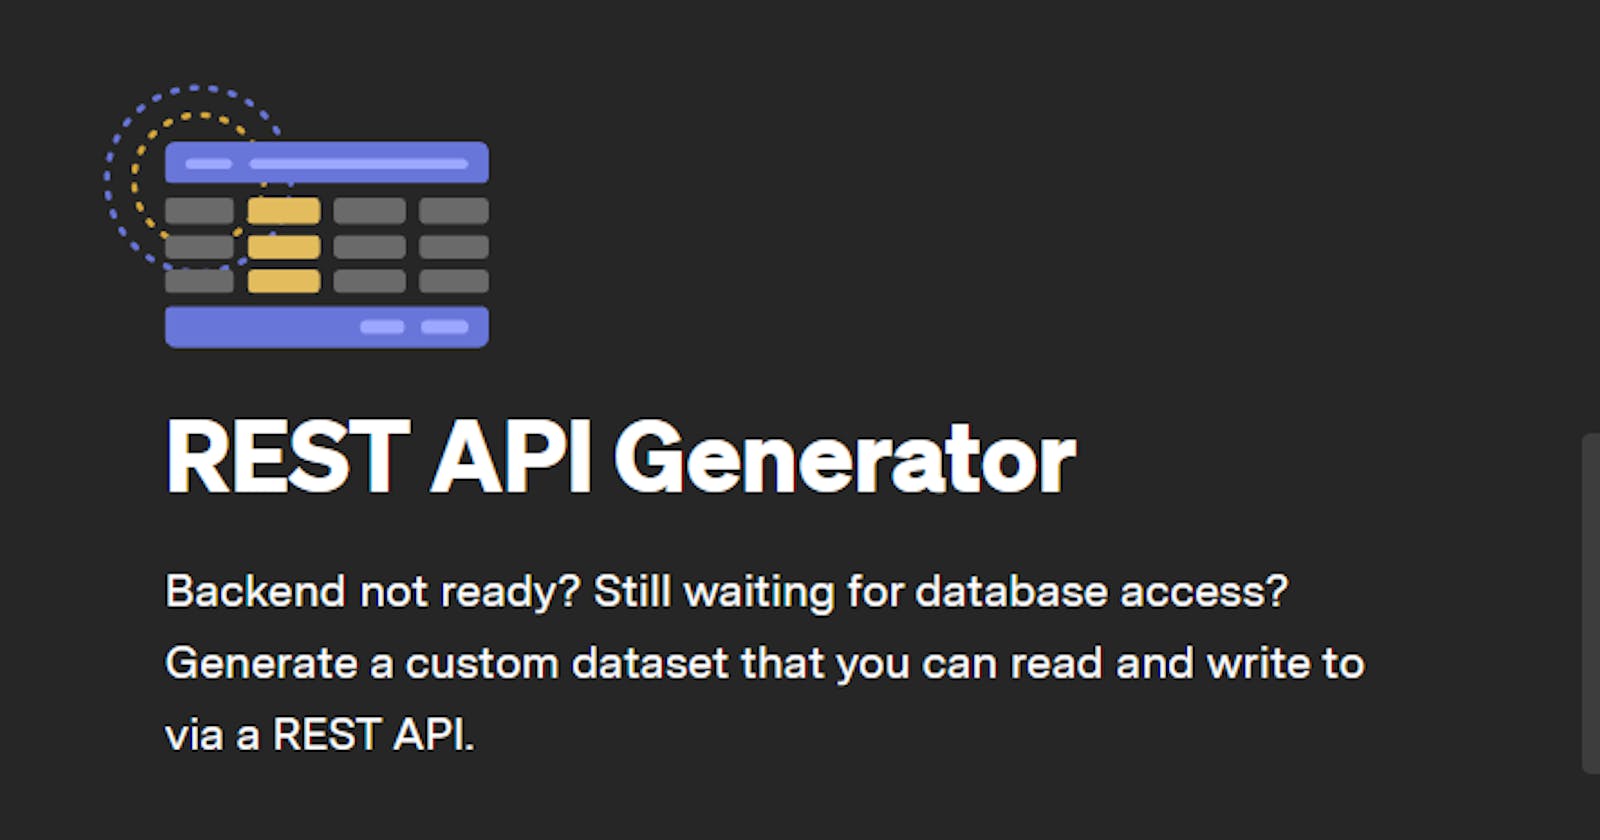 Backend not ready? Still waiting for database access? Generate a custom dataset that you can read and write to via a REST API.